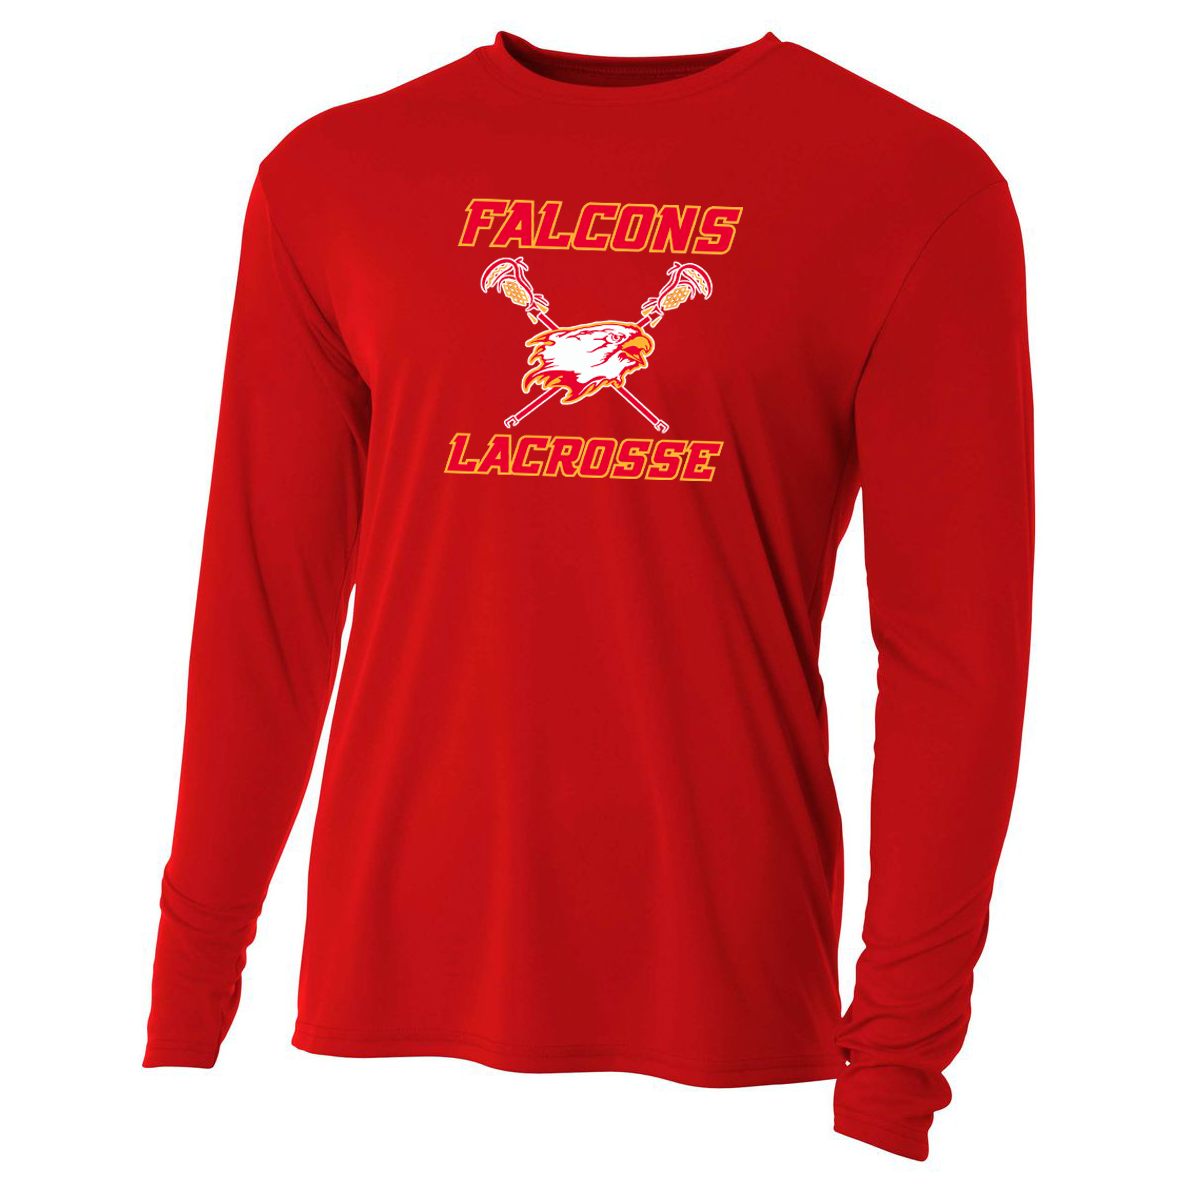 Falcons Lacrosse Club Cooling Performance Long Sleeve Crew